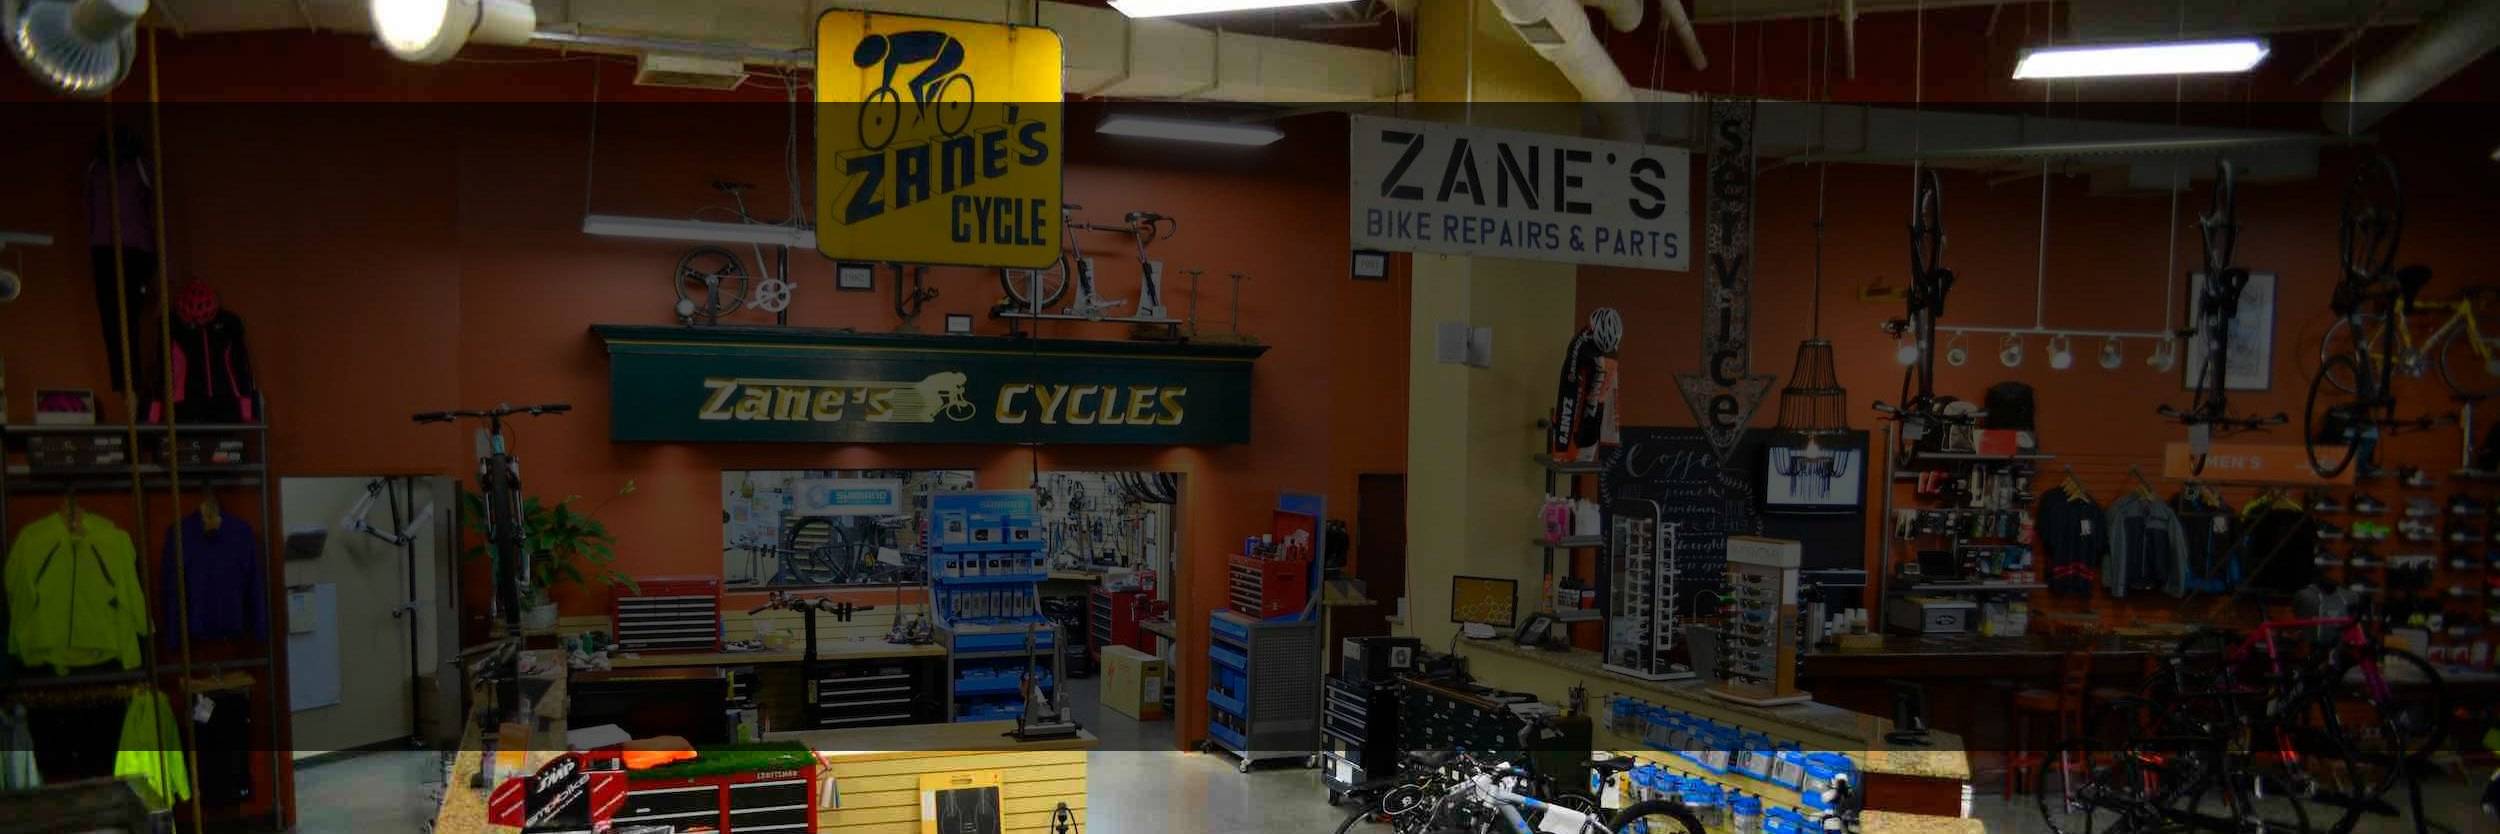 cycle service center near me